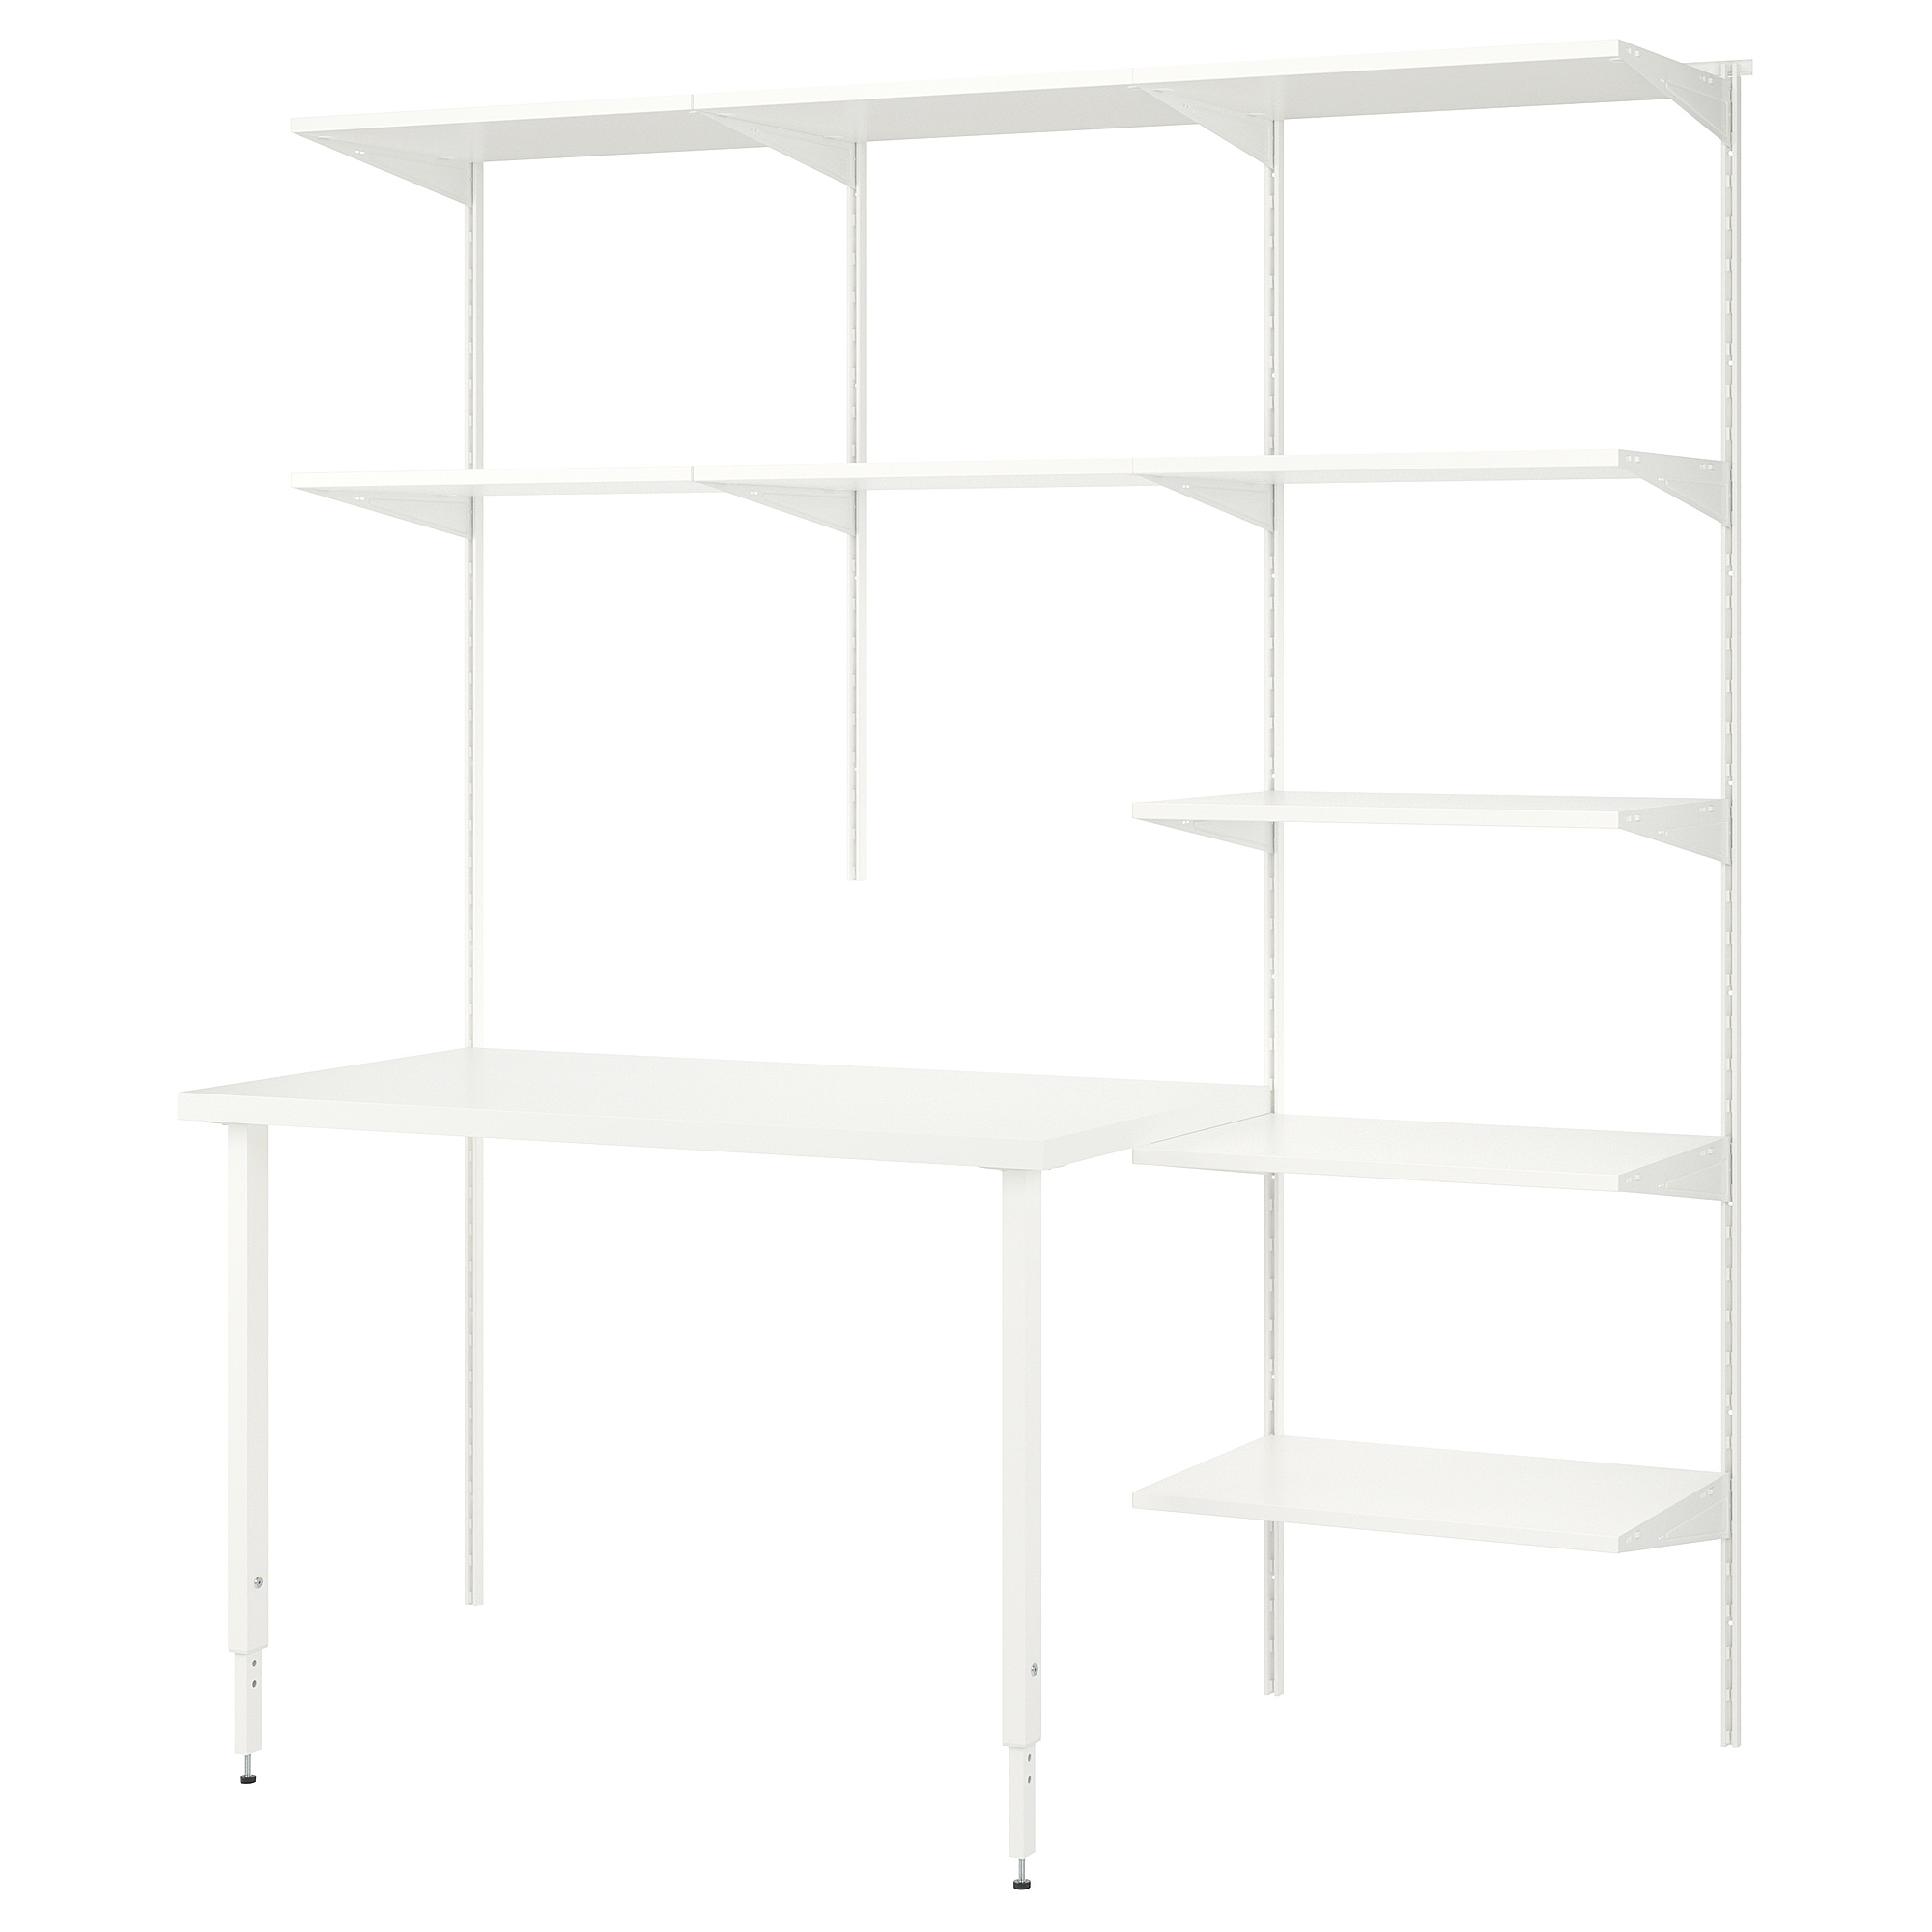 BOAXEL/LAGKAPTEN shelving unit with table top